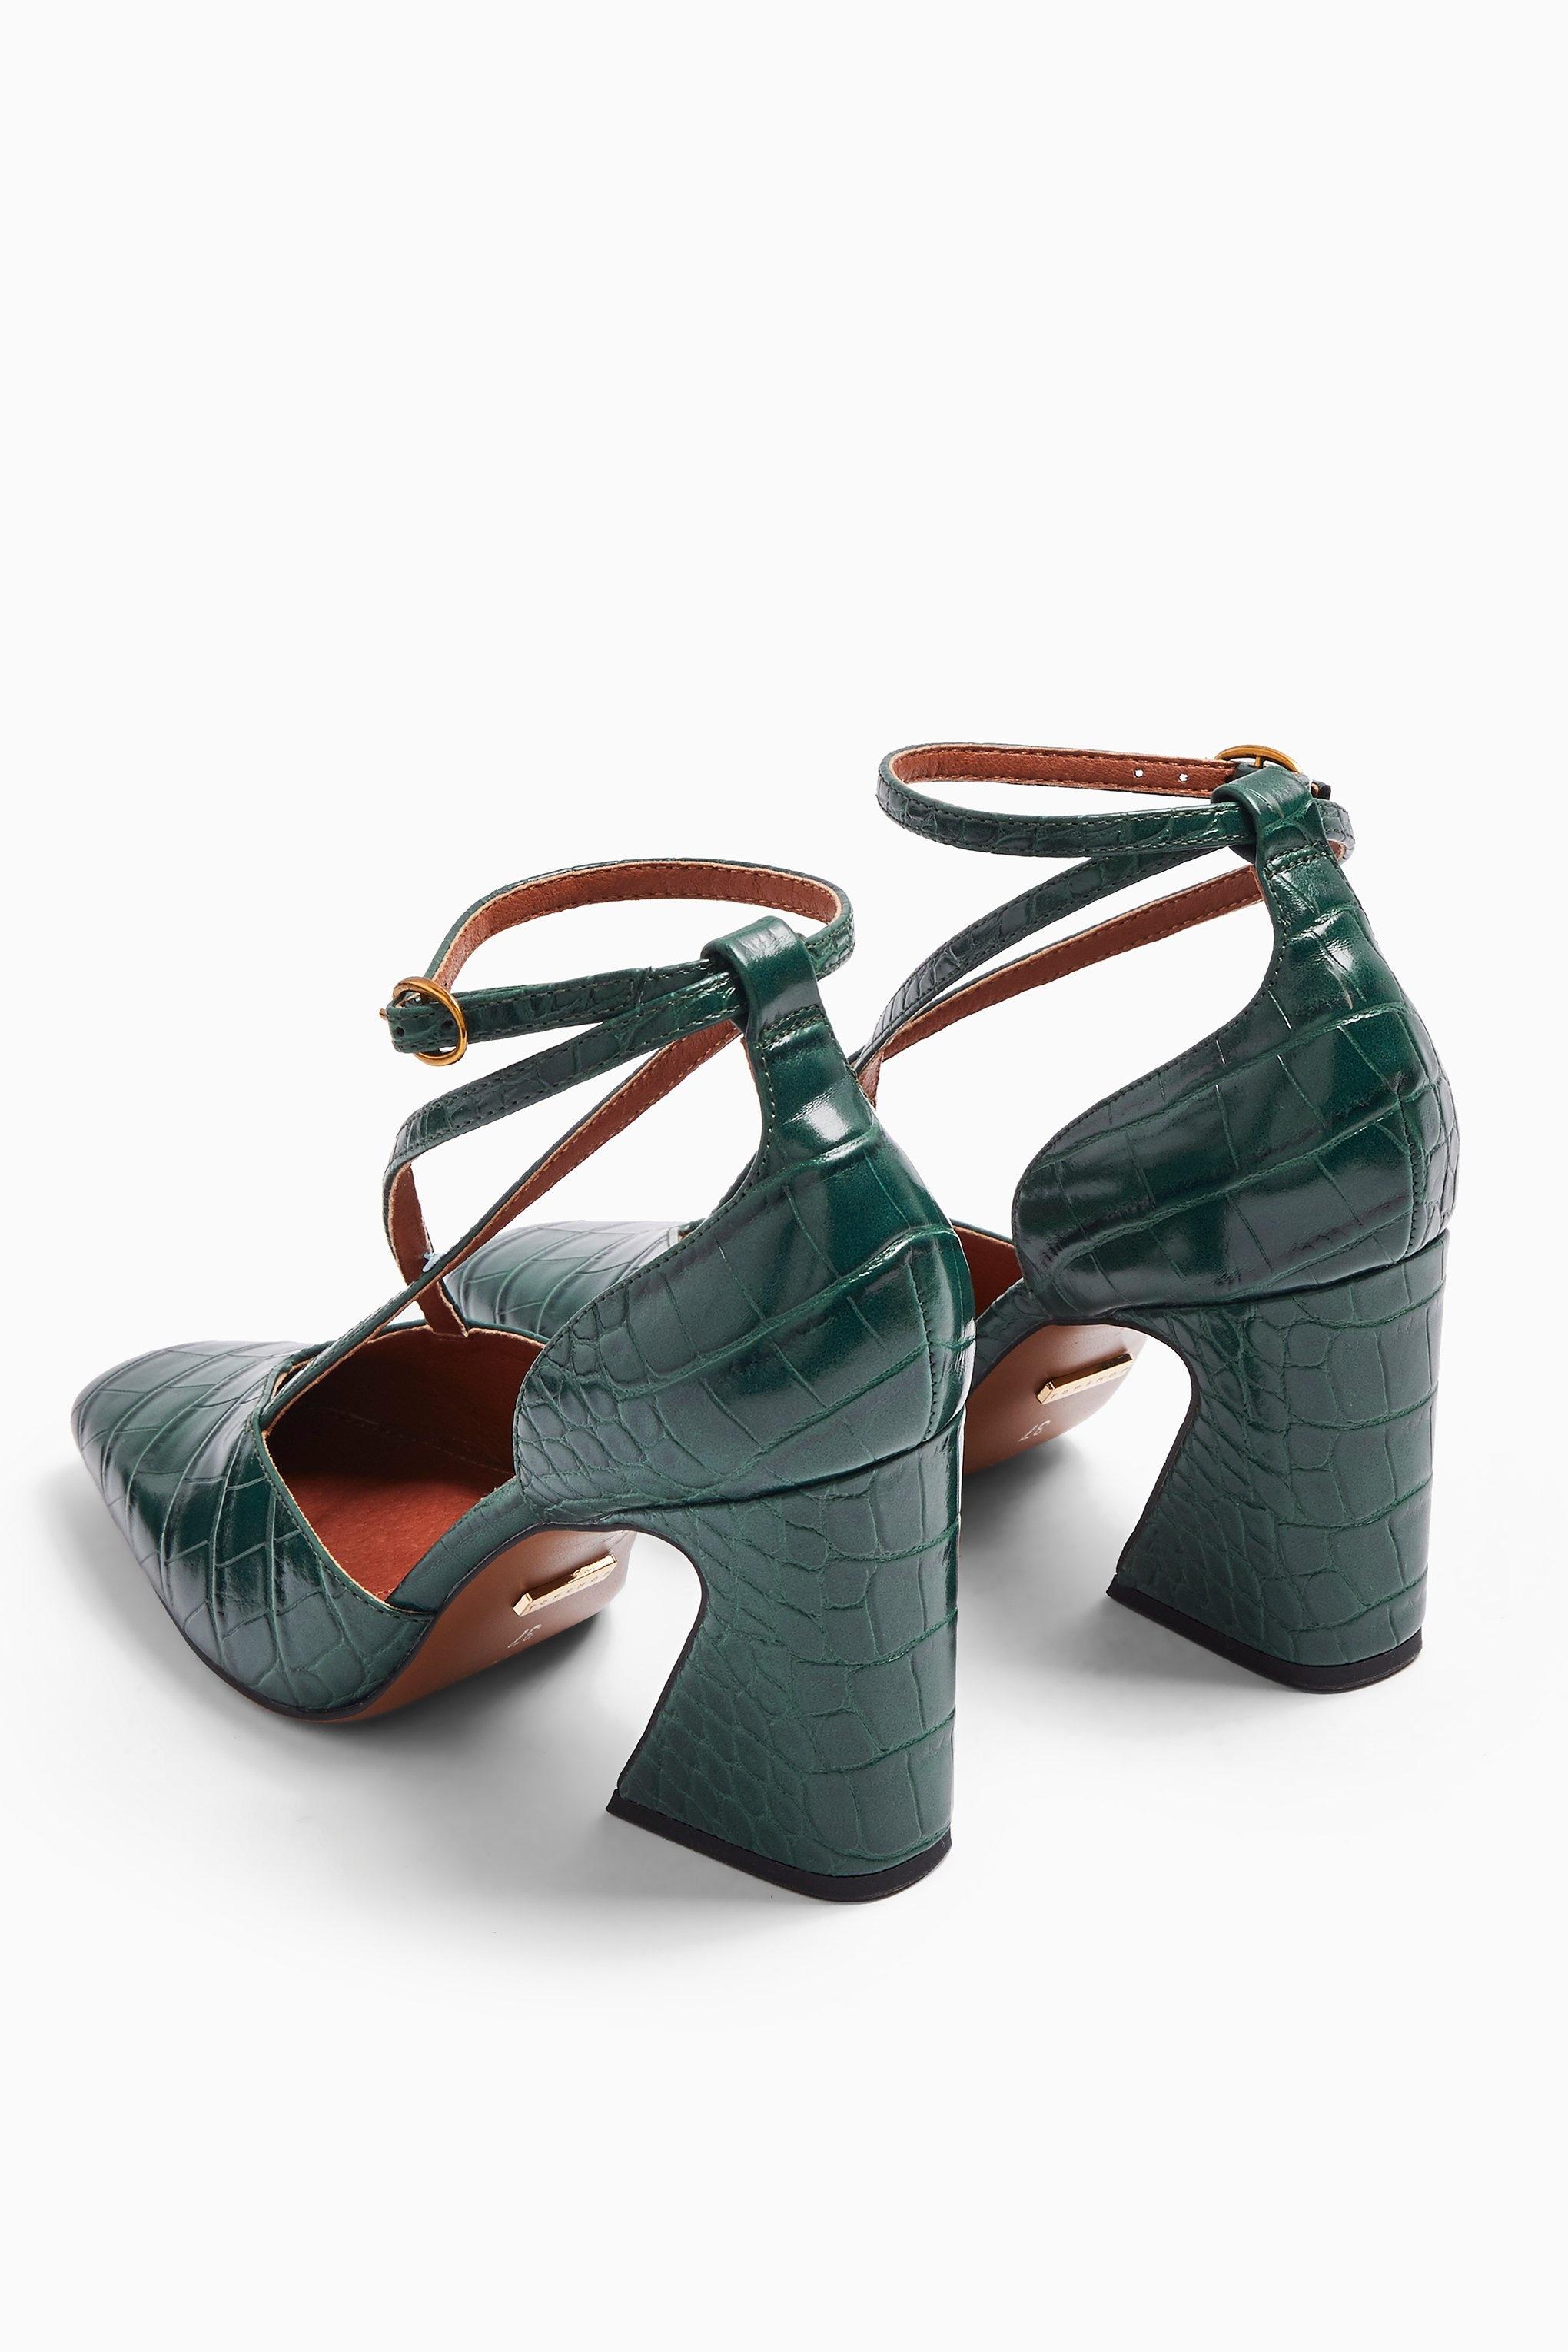 TOPSHOP Ghost Green Cross Front Court Shoes - Lyst